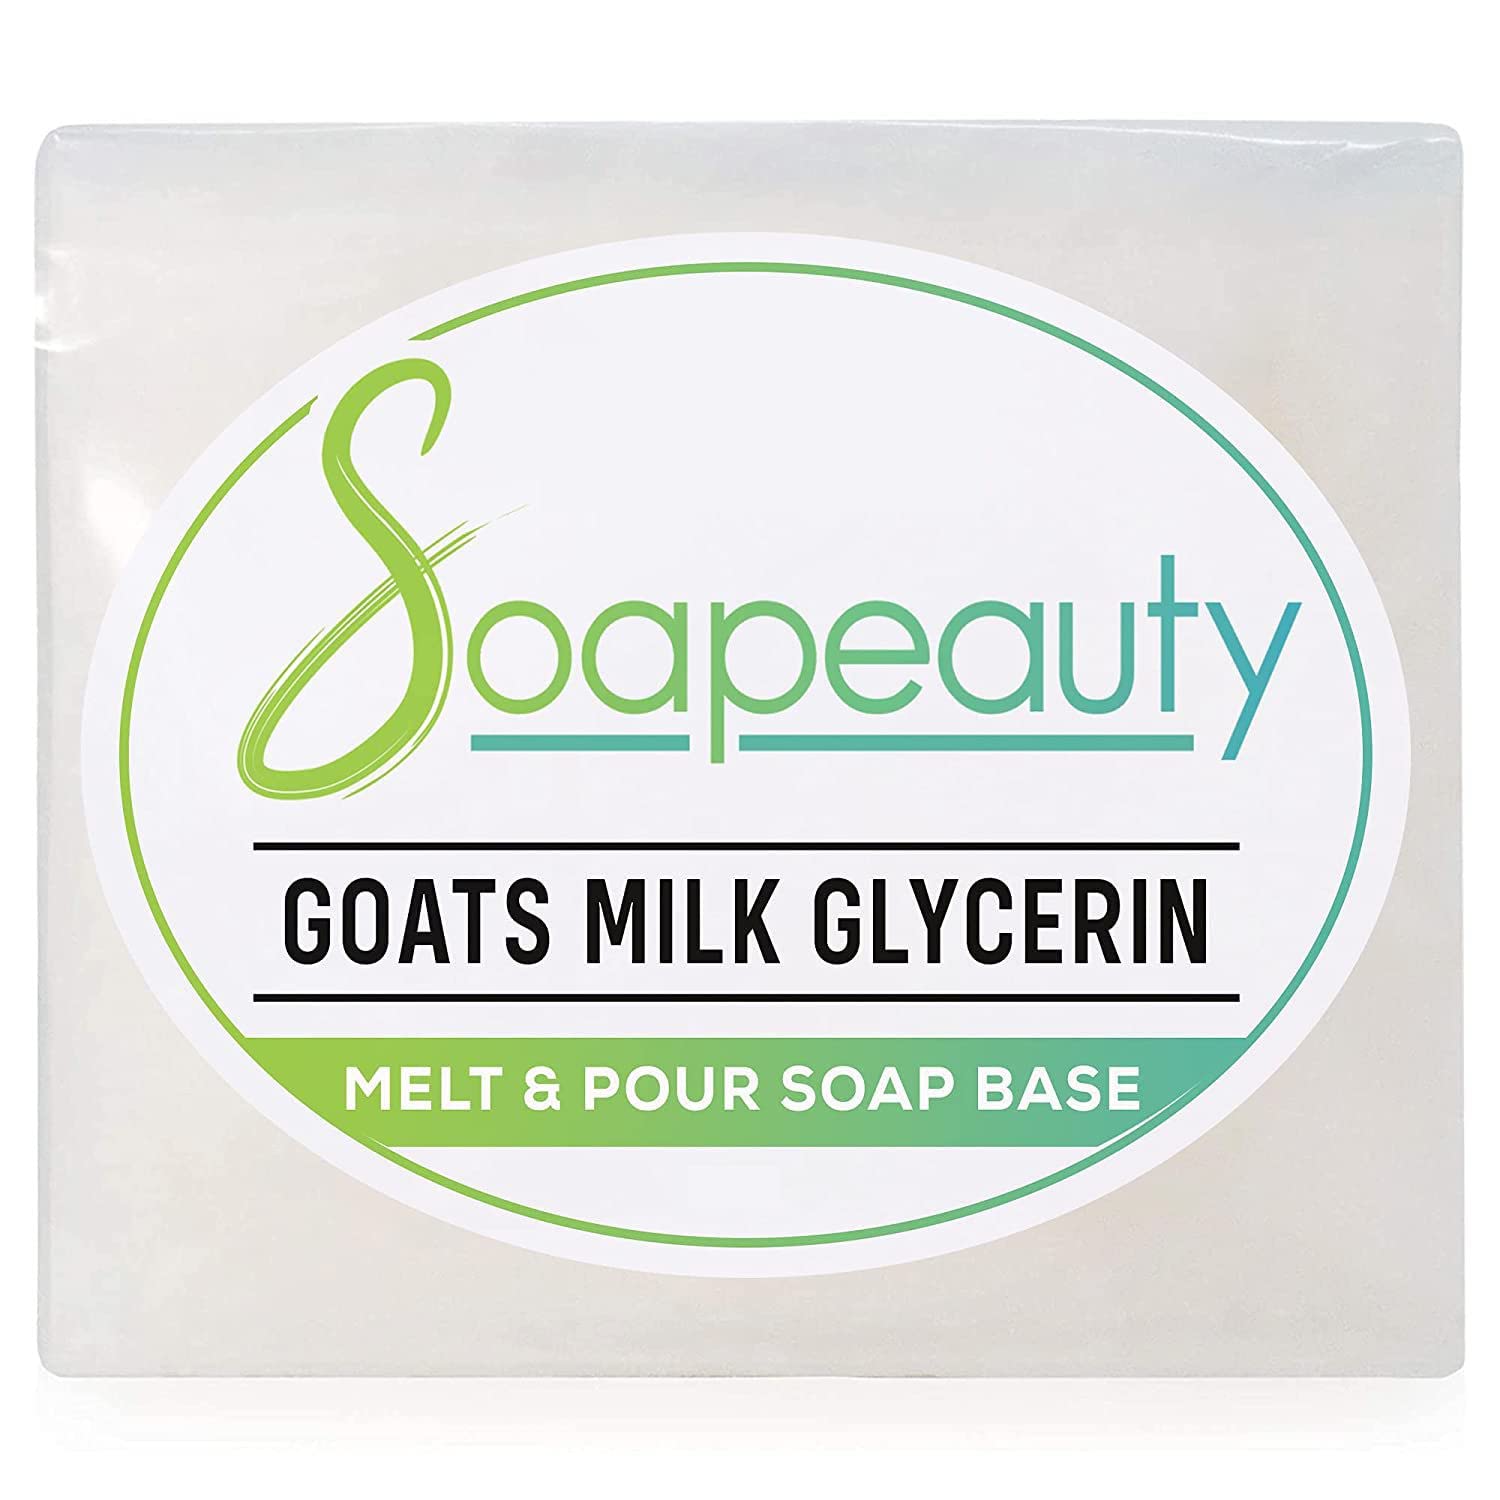 Melt and Pour Goat Milk Soap Base - Glycerin Melt and Pour Soap Base for Sensitive Skin - Perfect Soap Base for Homemade Soap, Moisturizing Bar Soap & Diy Soap Mixing - 2 Lbs